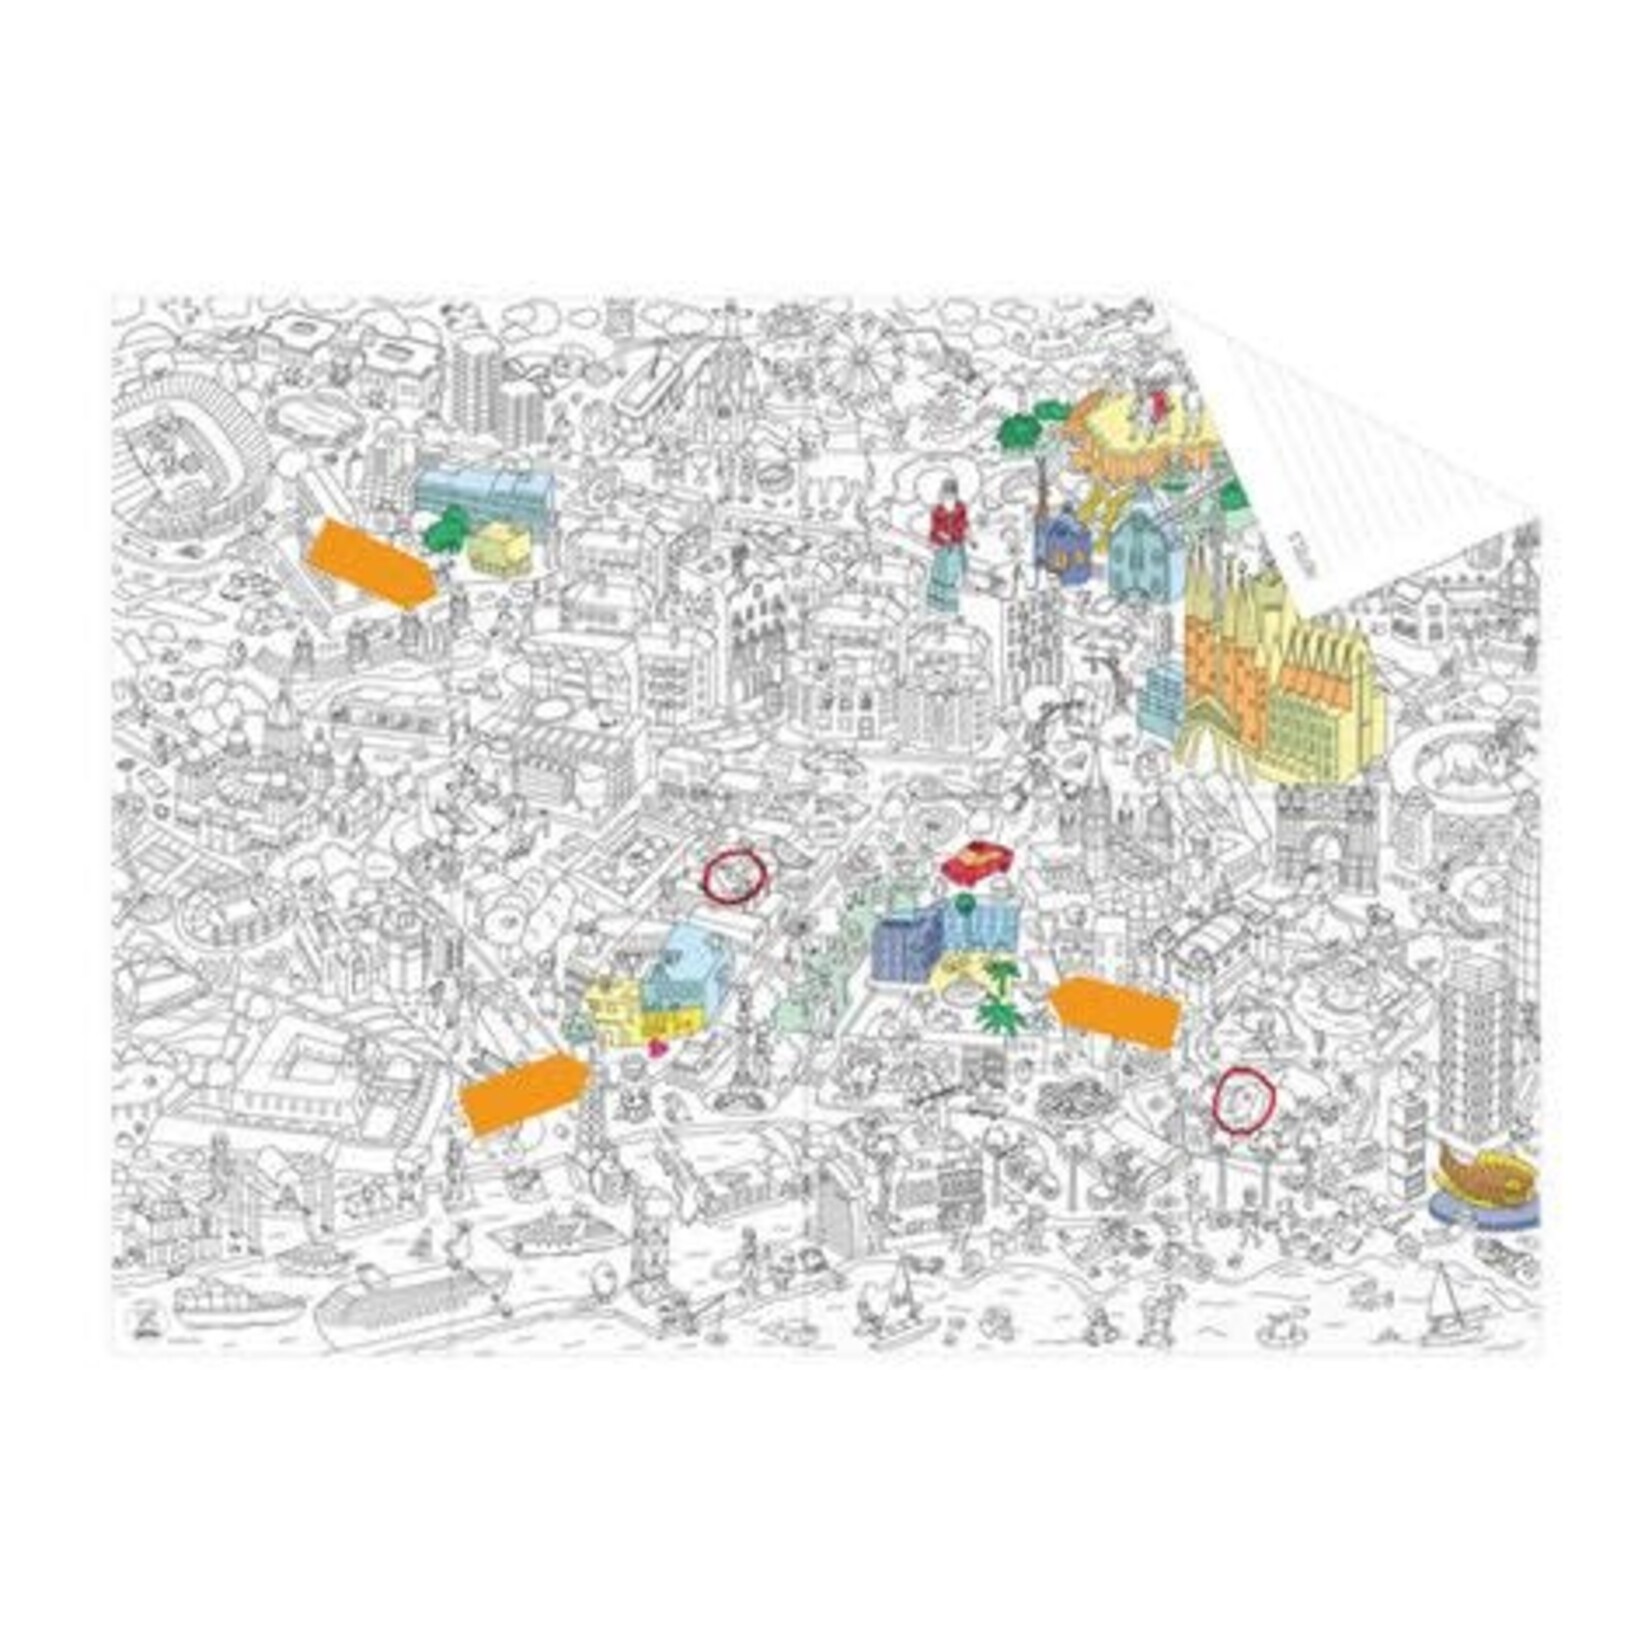 Omy Plan Barcelone à Colorier + 12 Memo Stickers Pocket Maps